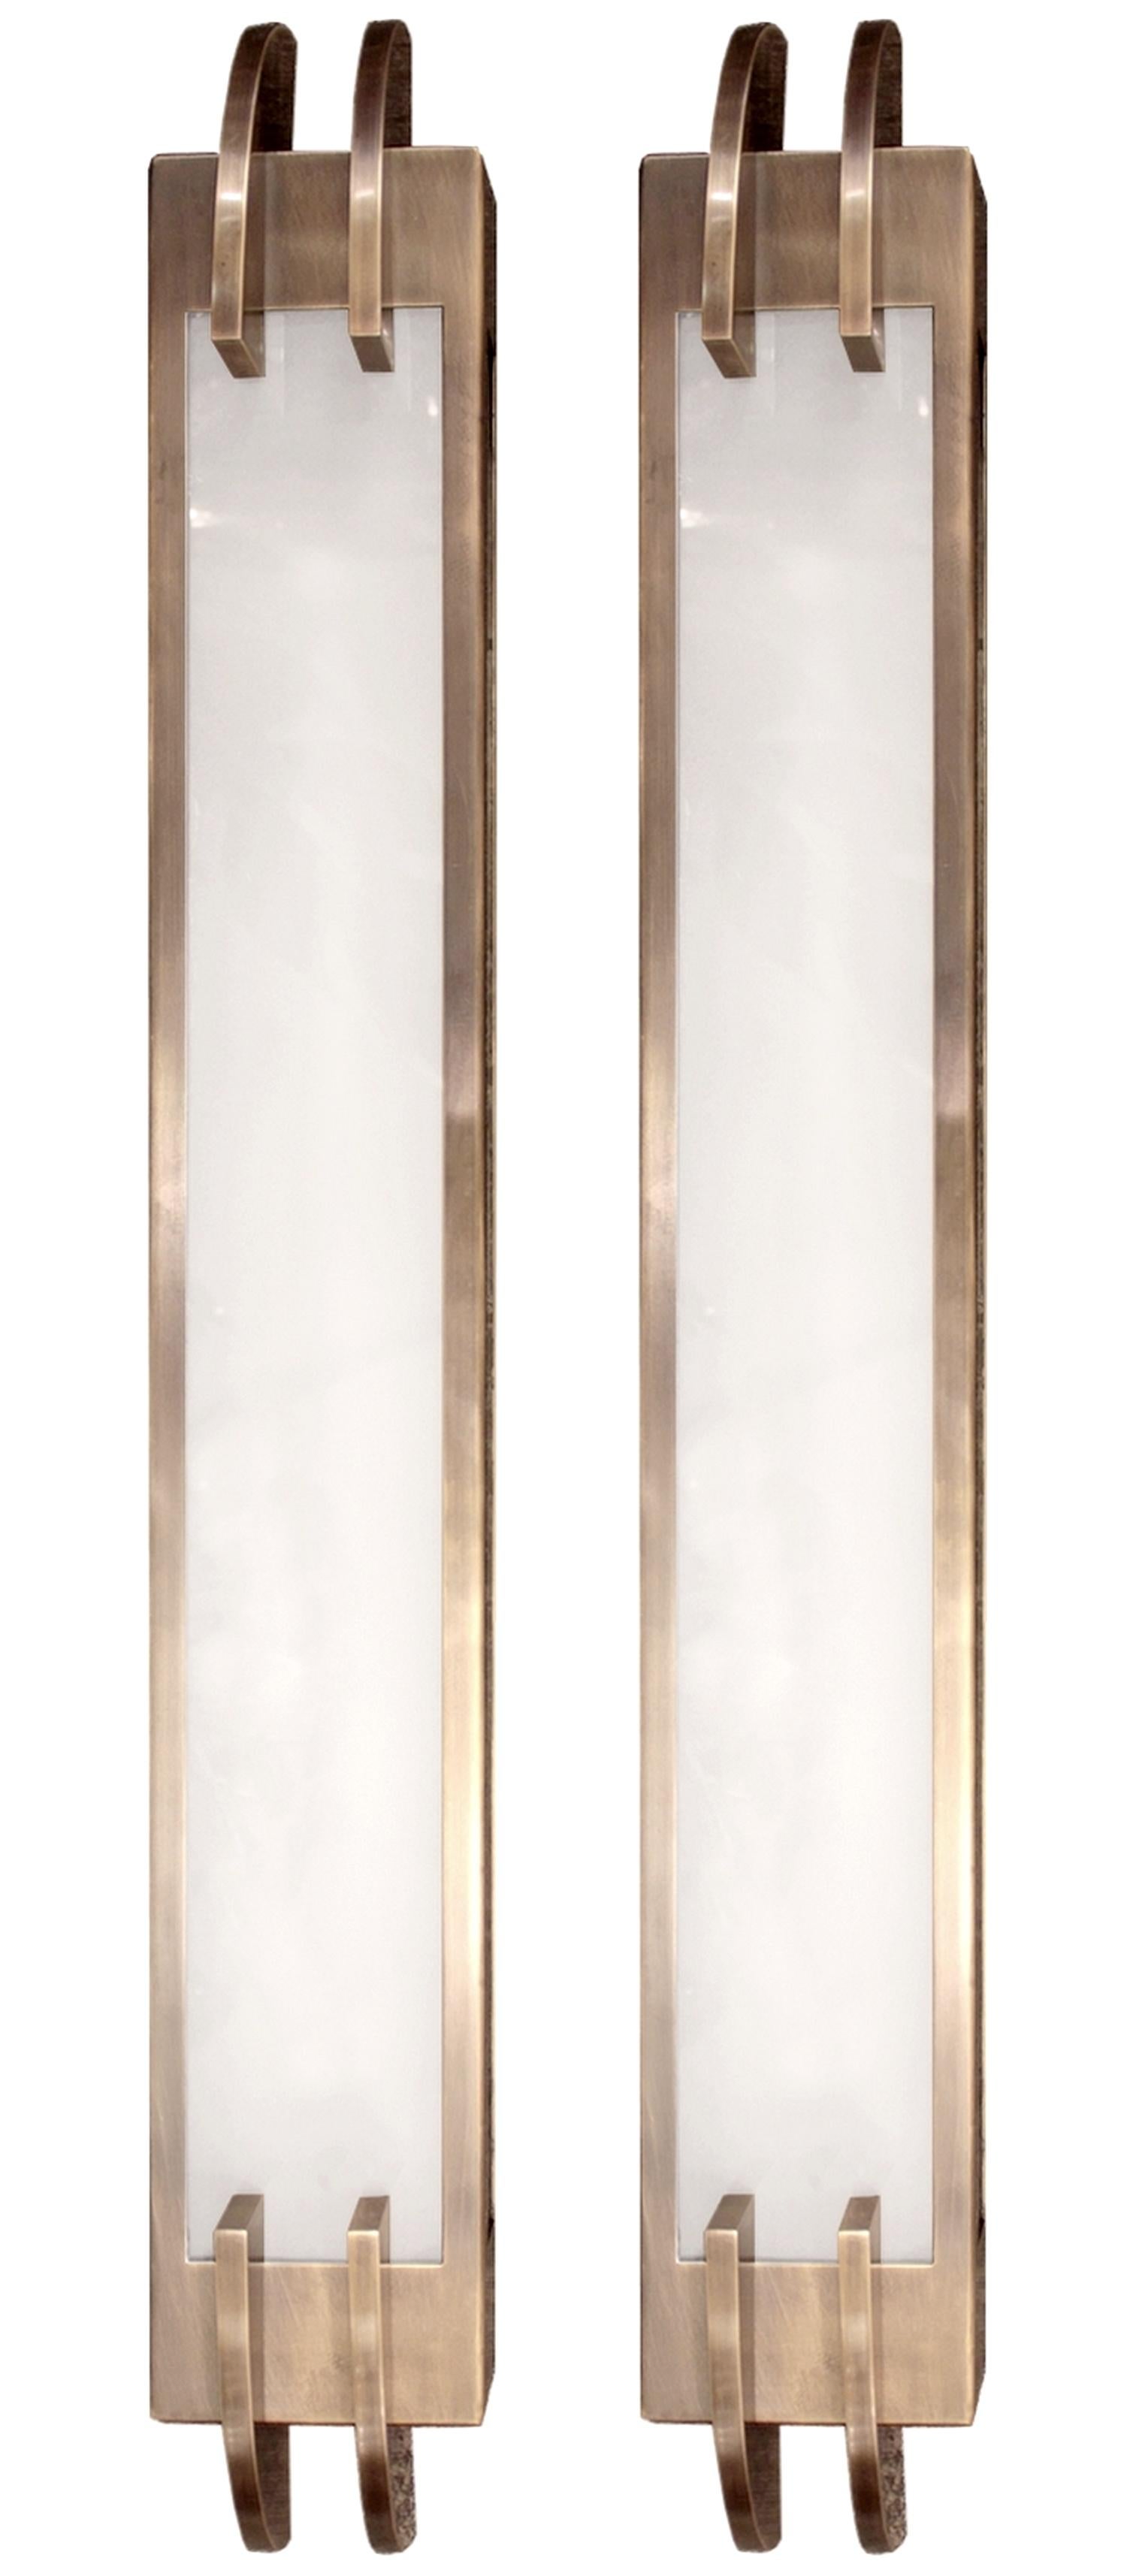 Two large Art Deco sconces in patinated brass and sandblasted glass.
The lighting consists of a fluorescent tube hidden inside the wall lamp.
Quality manufacturing.

Measures: Total height 37.4 in
Height of the central part 31.5 in
Width 4.7